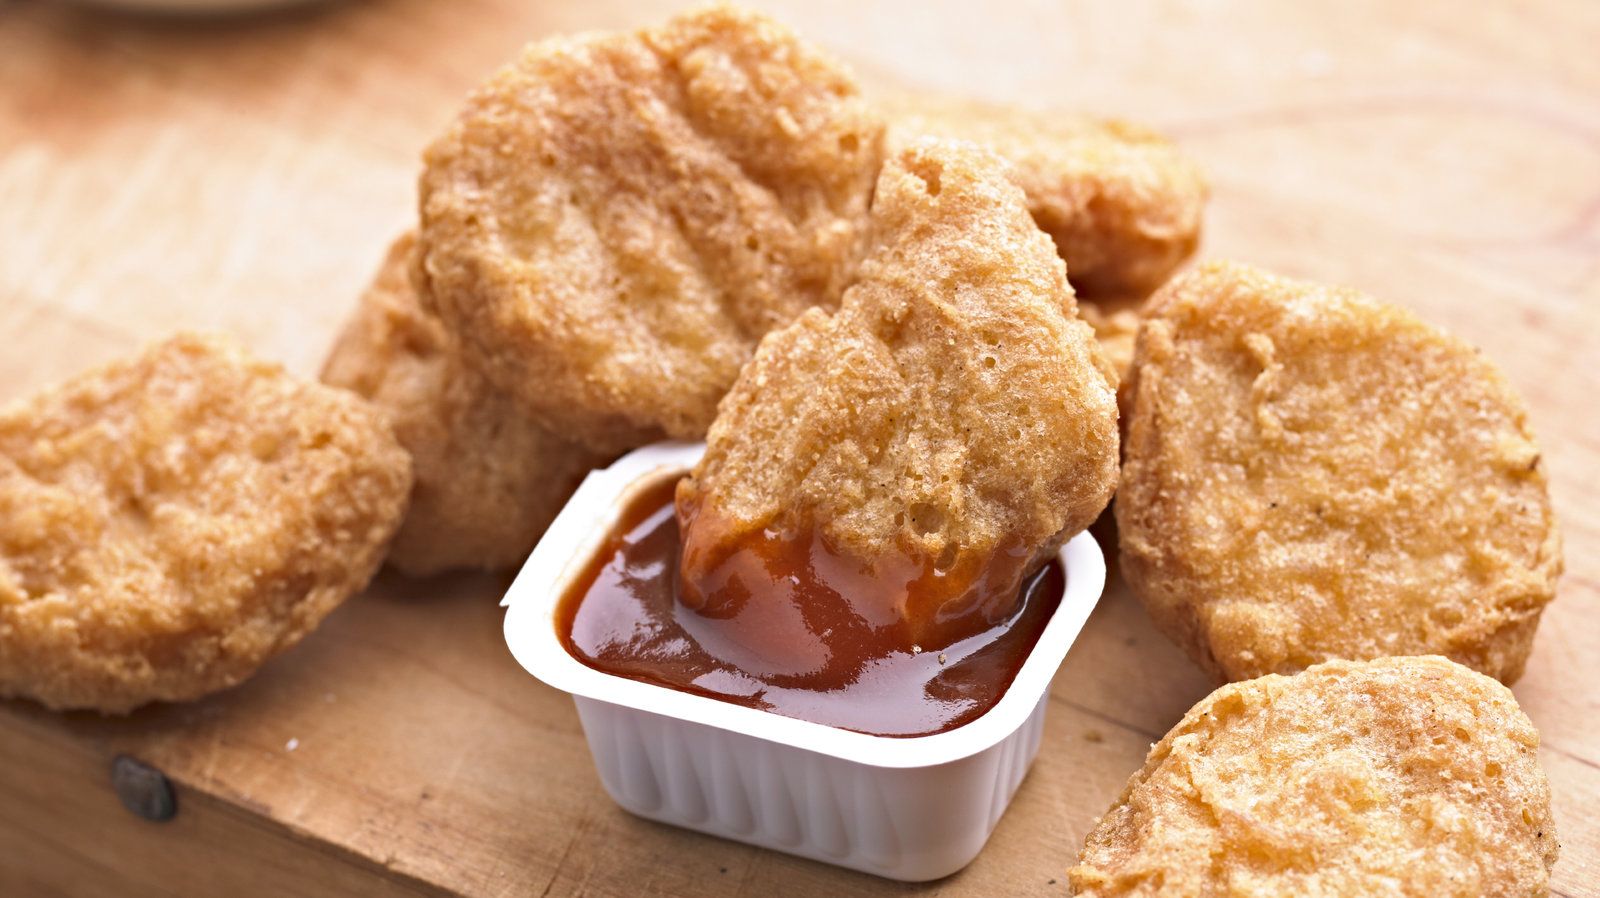 chickennuggets-wide-290cf617c0504d91611478afd36223ca5ebbdffe-s1600-c85-1529508639.jpg